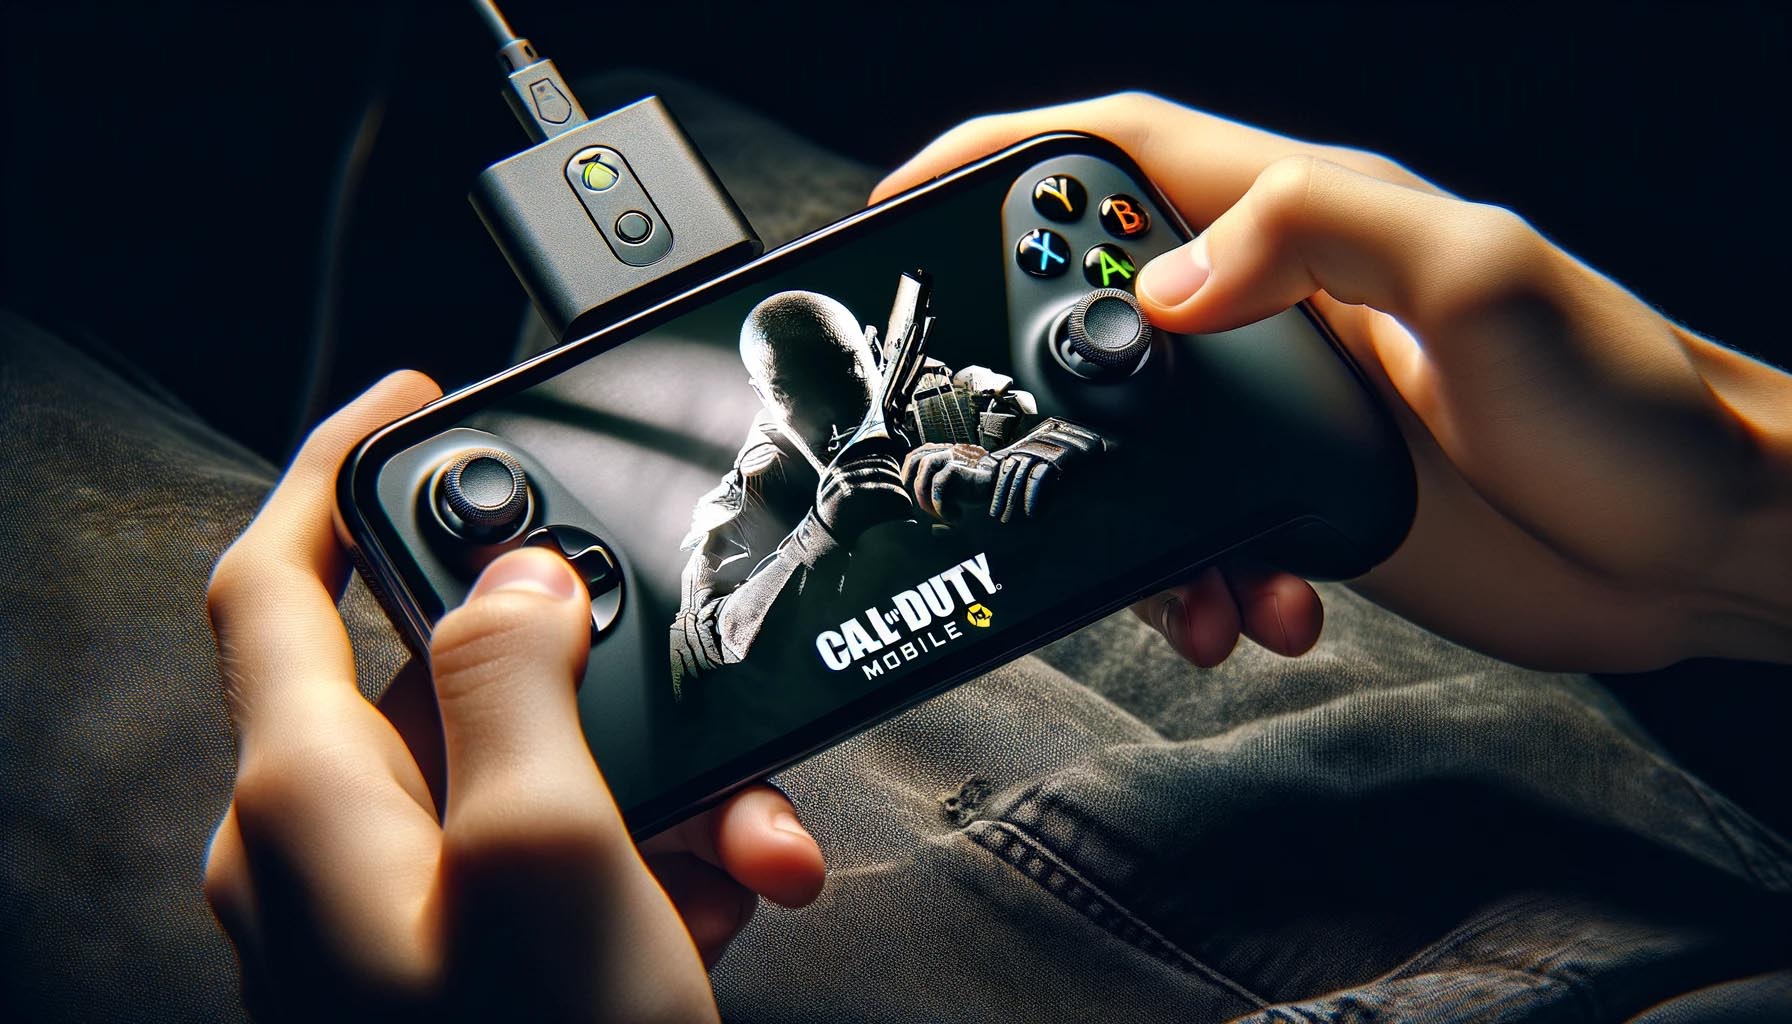 How to Connect Xbox Controller to Call of Duty Mobile